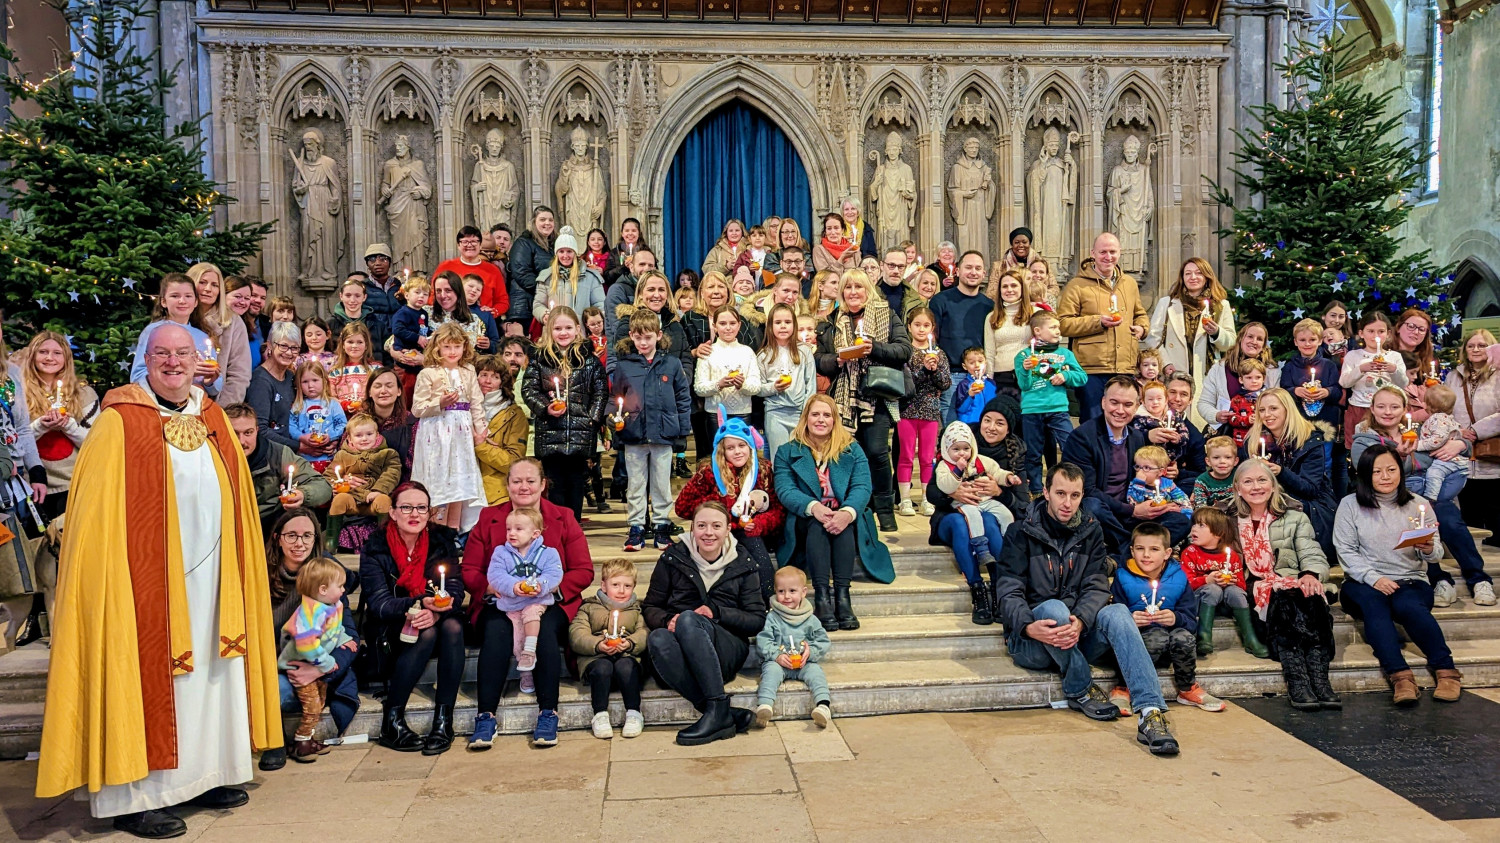 A mixed group of adults and children gather on the steps of the Nave altar with their christingles